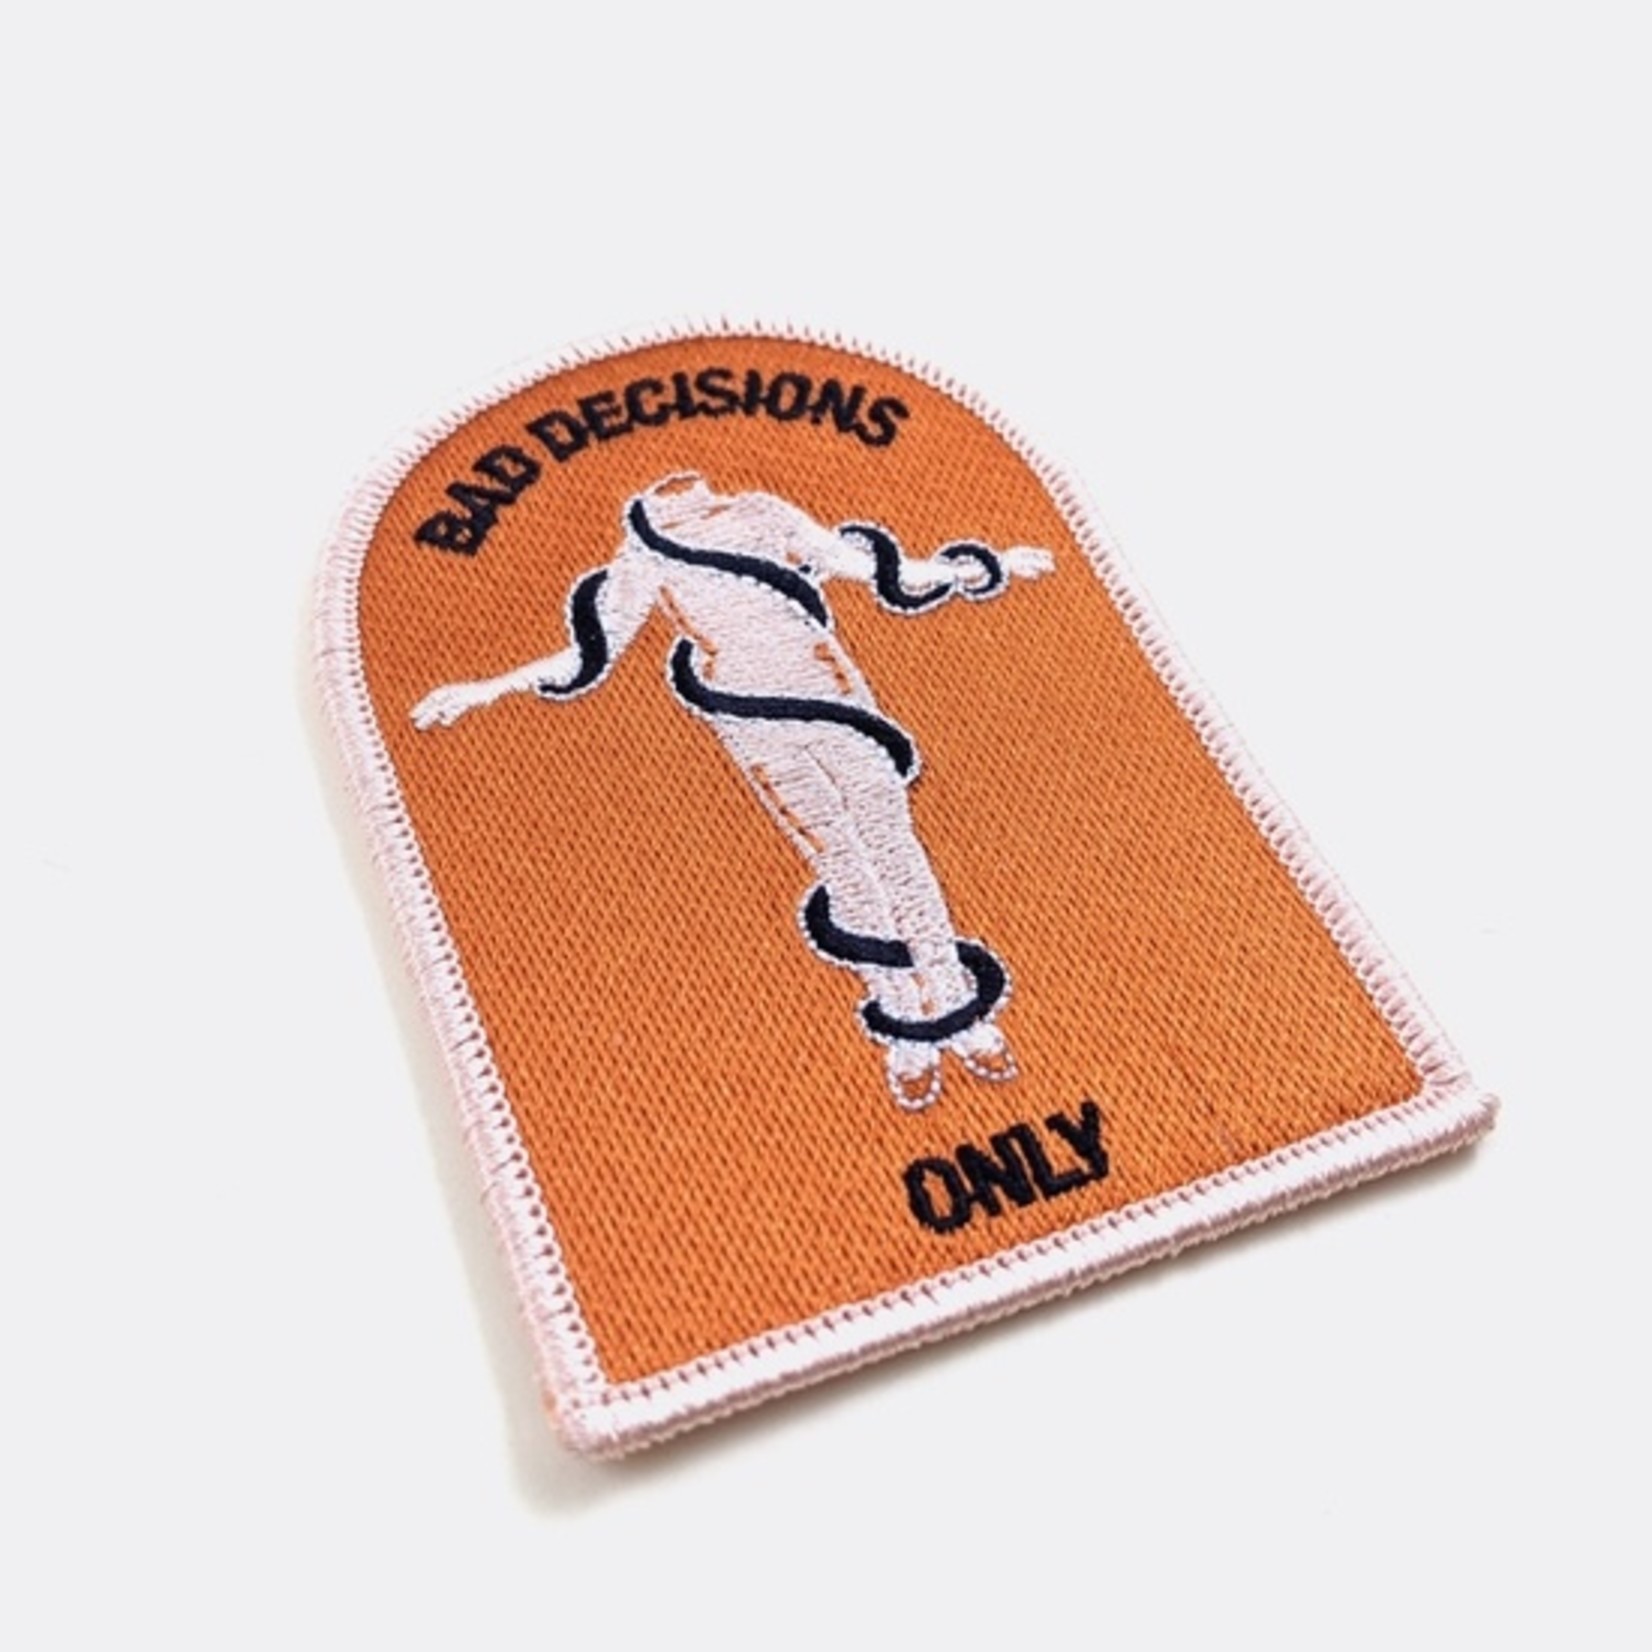 Badaboom Bad Decisions Only Patch